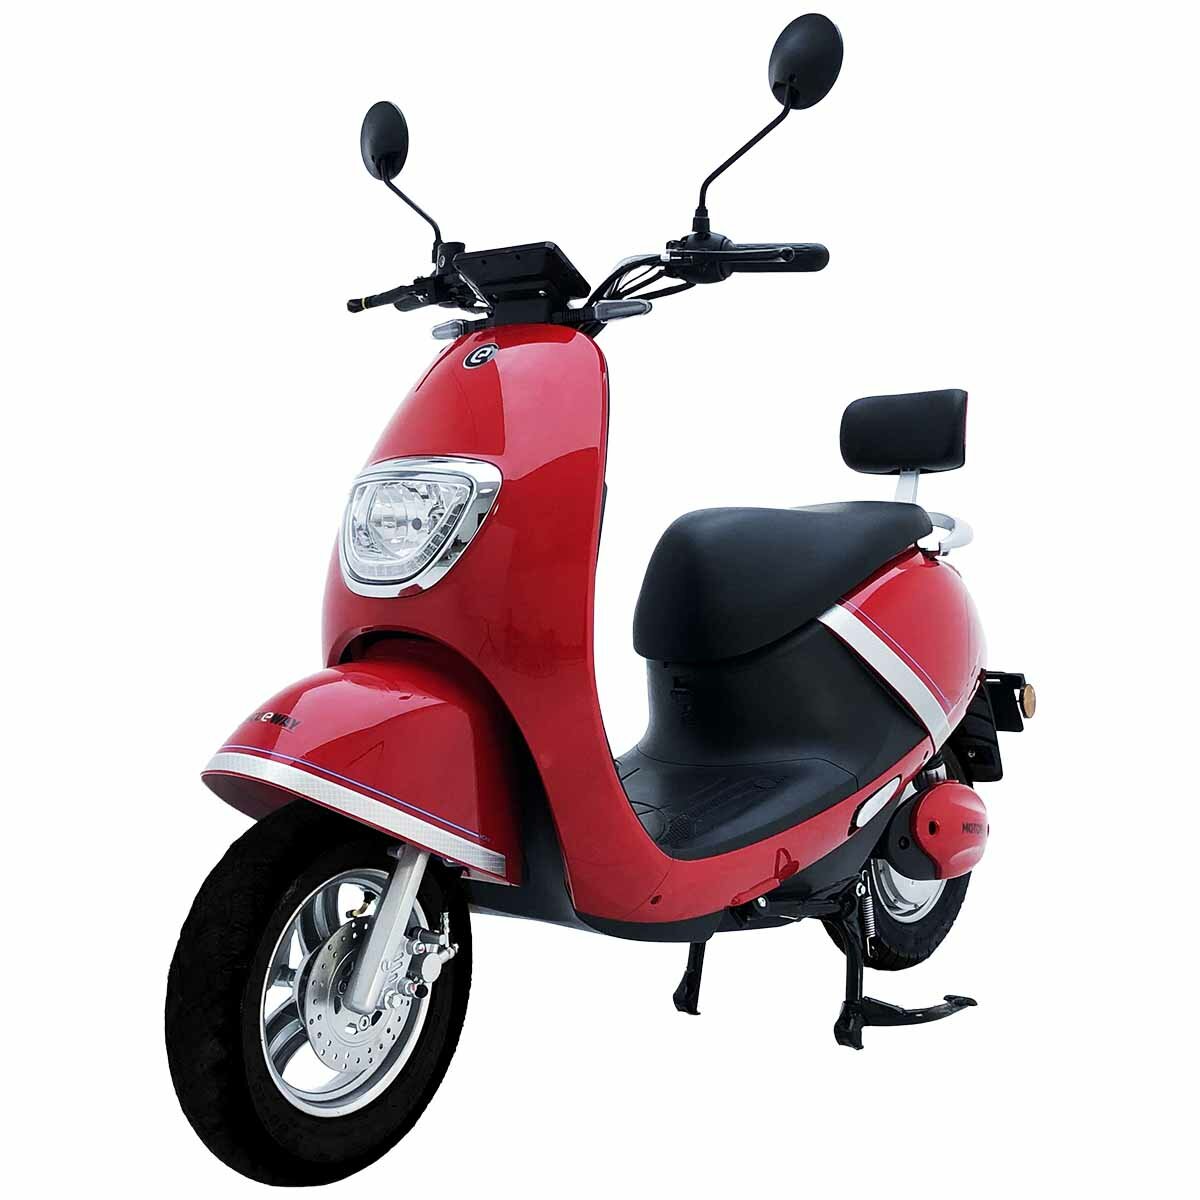 best price,racceway,motoe,13,electric,scooter,60v,20ah,1500w,10inch,eu,coupon,price,discount